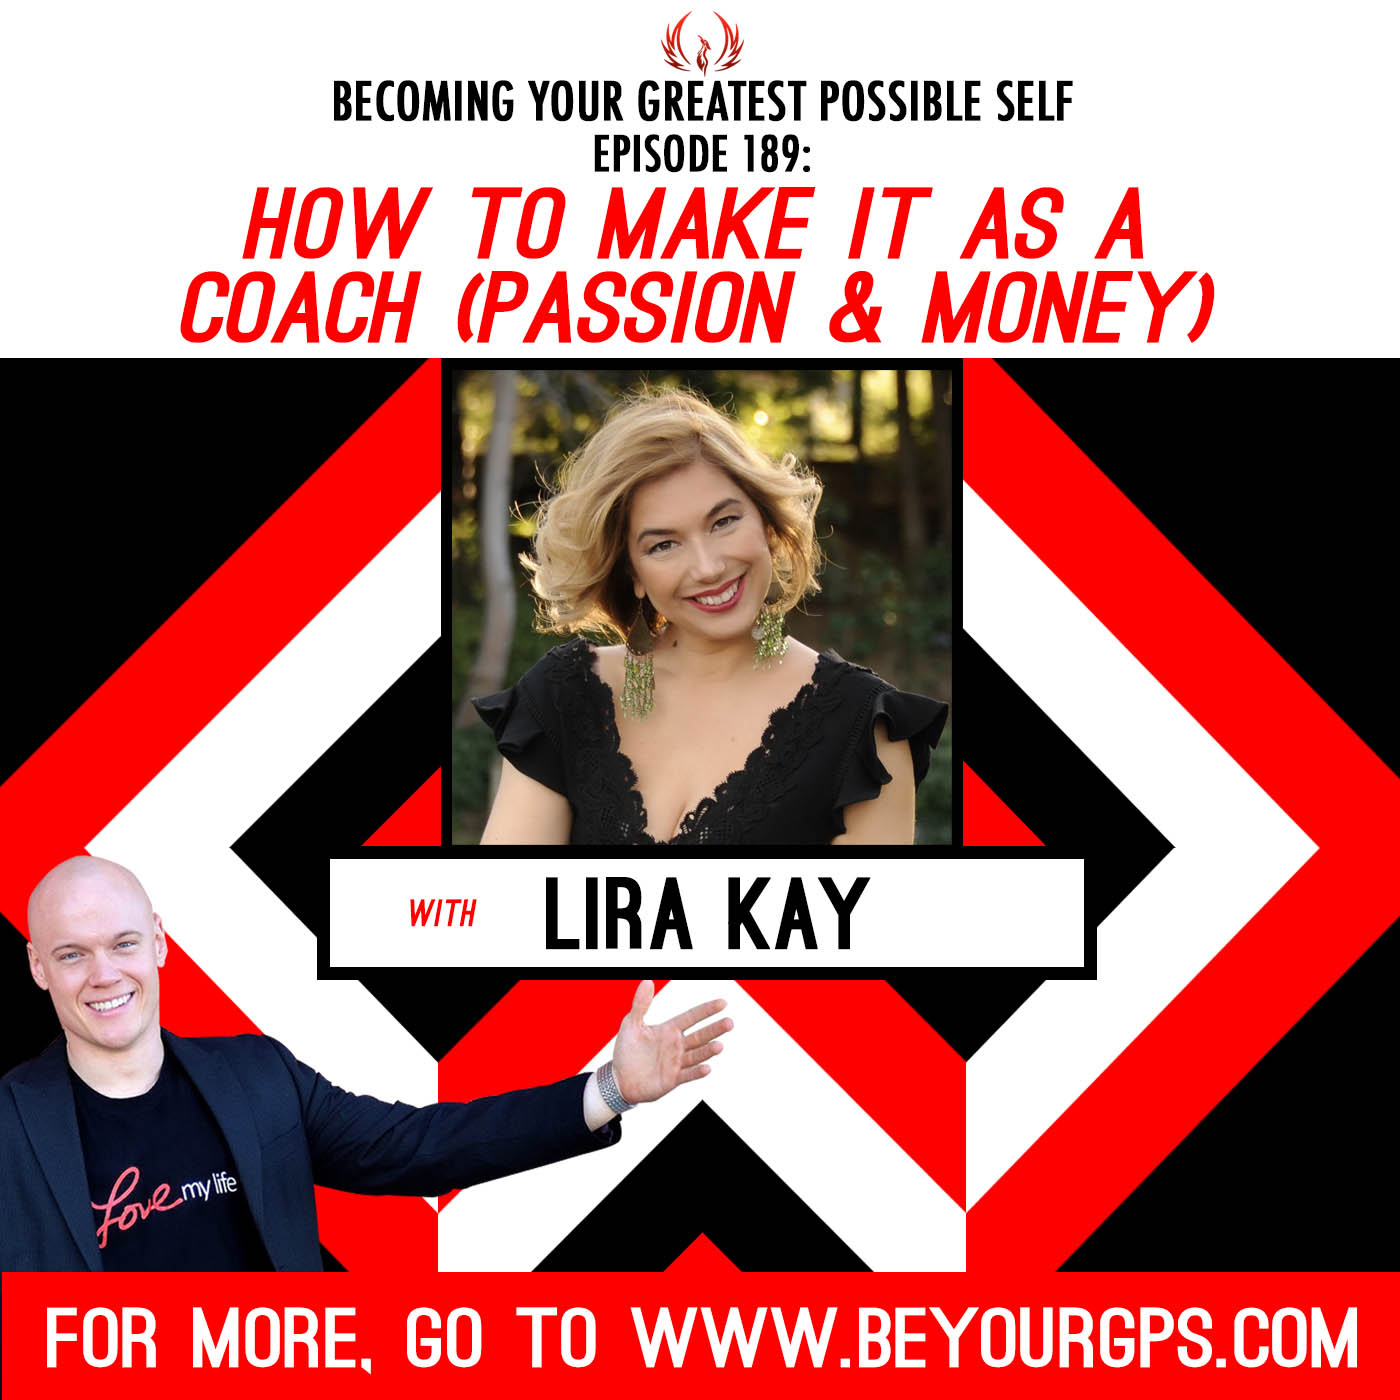 How To Make It As A Coach (Passion & Money) with Lira Kay